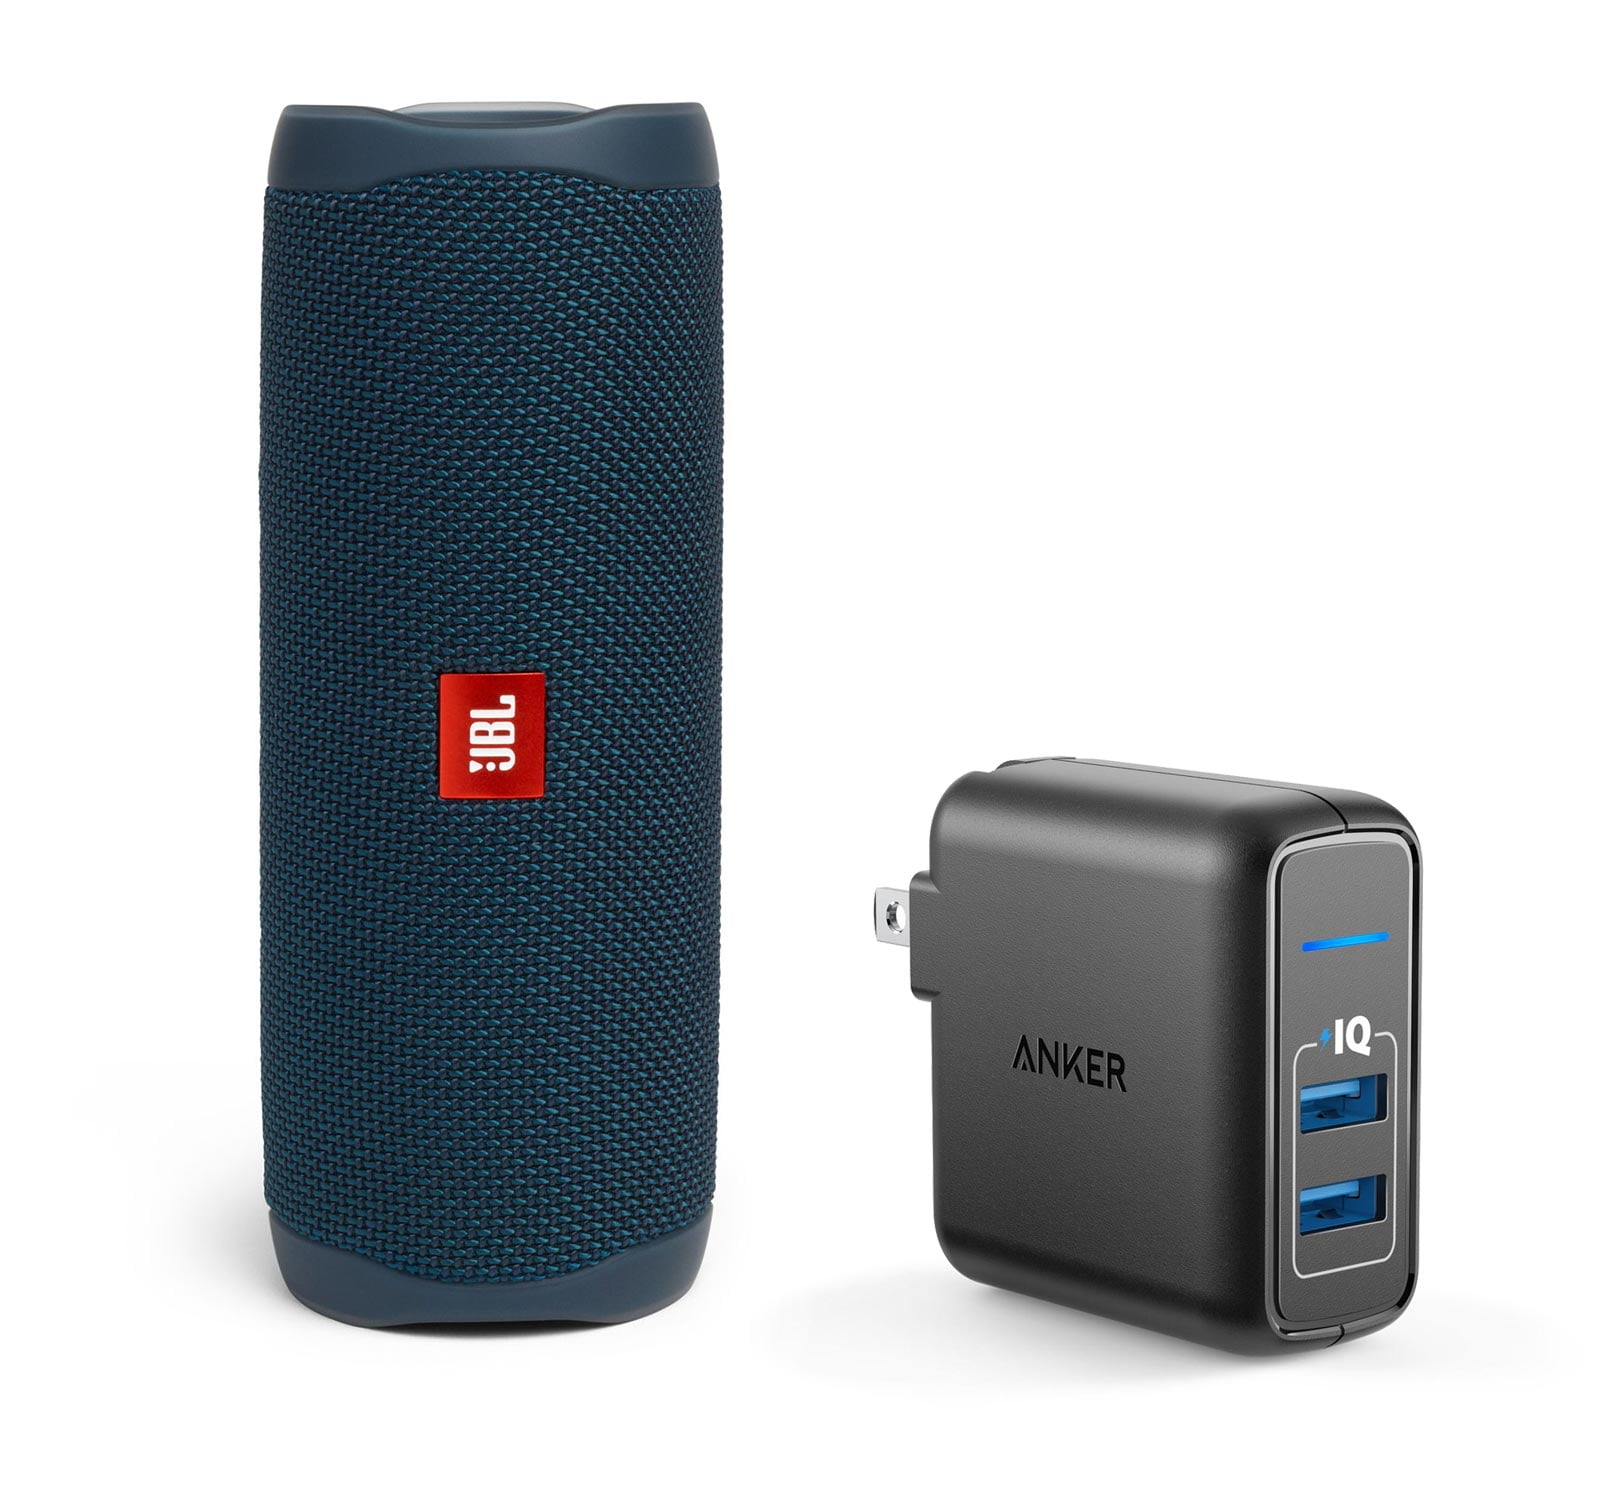 can you pair more then 1 jbl flip bluetooth speaker